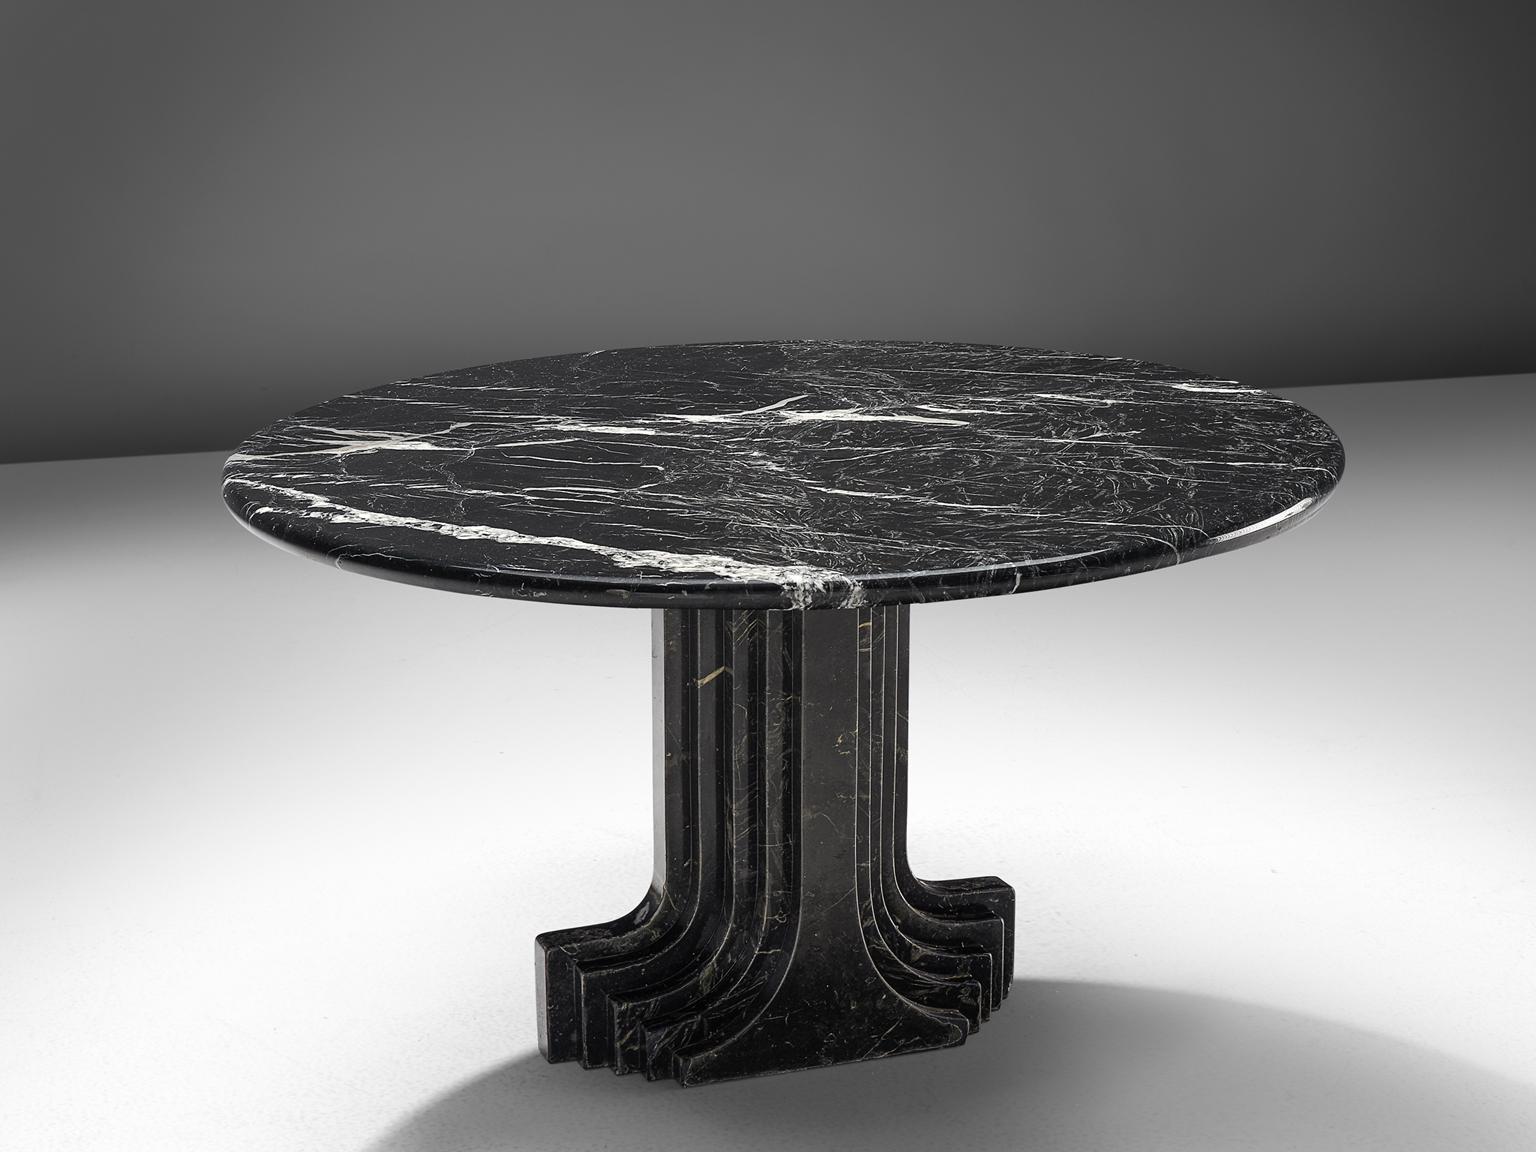 Carlo Scarpa reeditioned by Simon, 'Argo' travertine table, Italy, 1980s.

The base of the table is formed out of a pillar that seems to be built up of several pillars in a row, clearly a reference to the architectural influence that Scarpa is